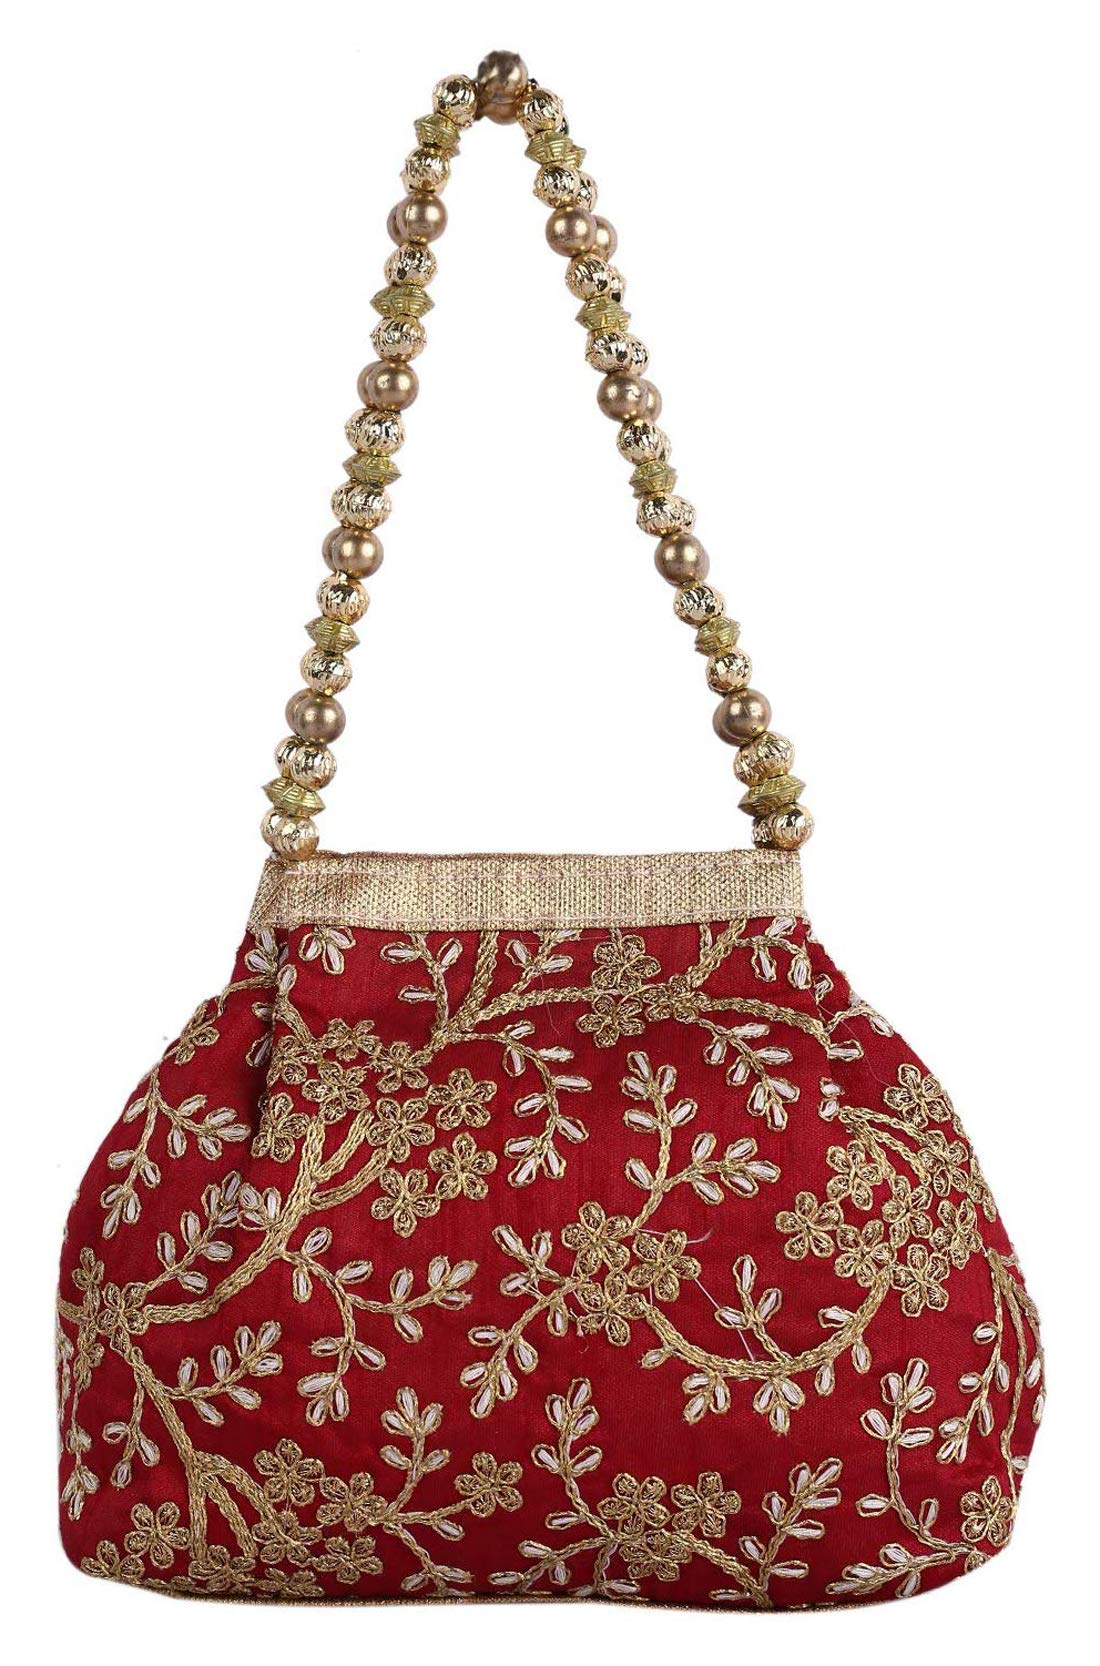 Kuber Industries Polyester Embroidered Woman Potli Bag, Maroon - CTKTC31386